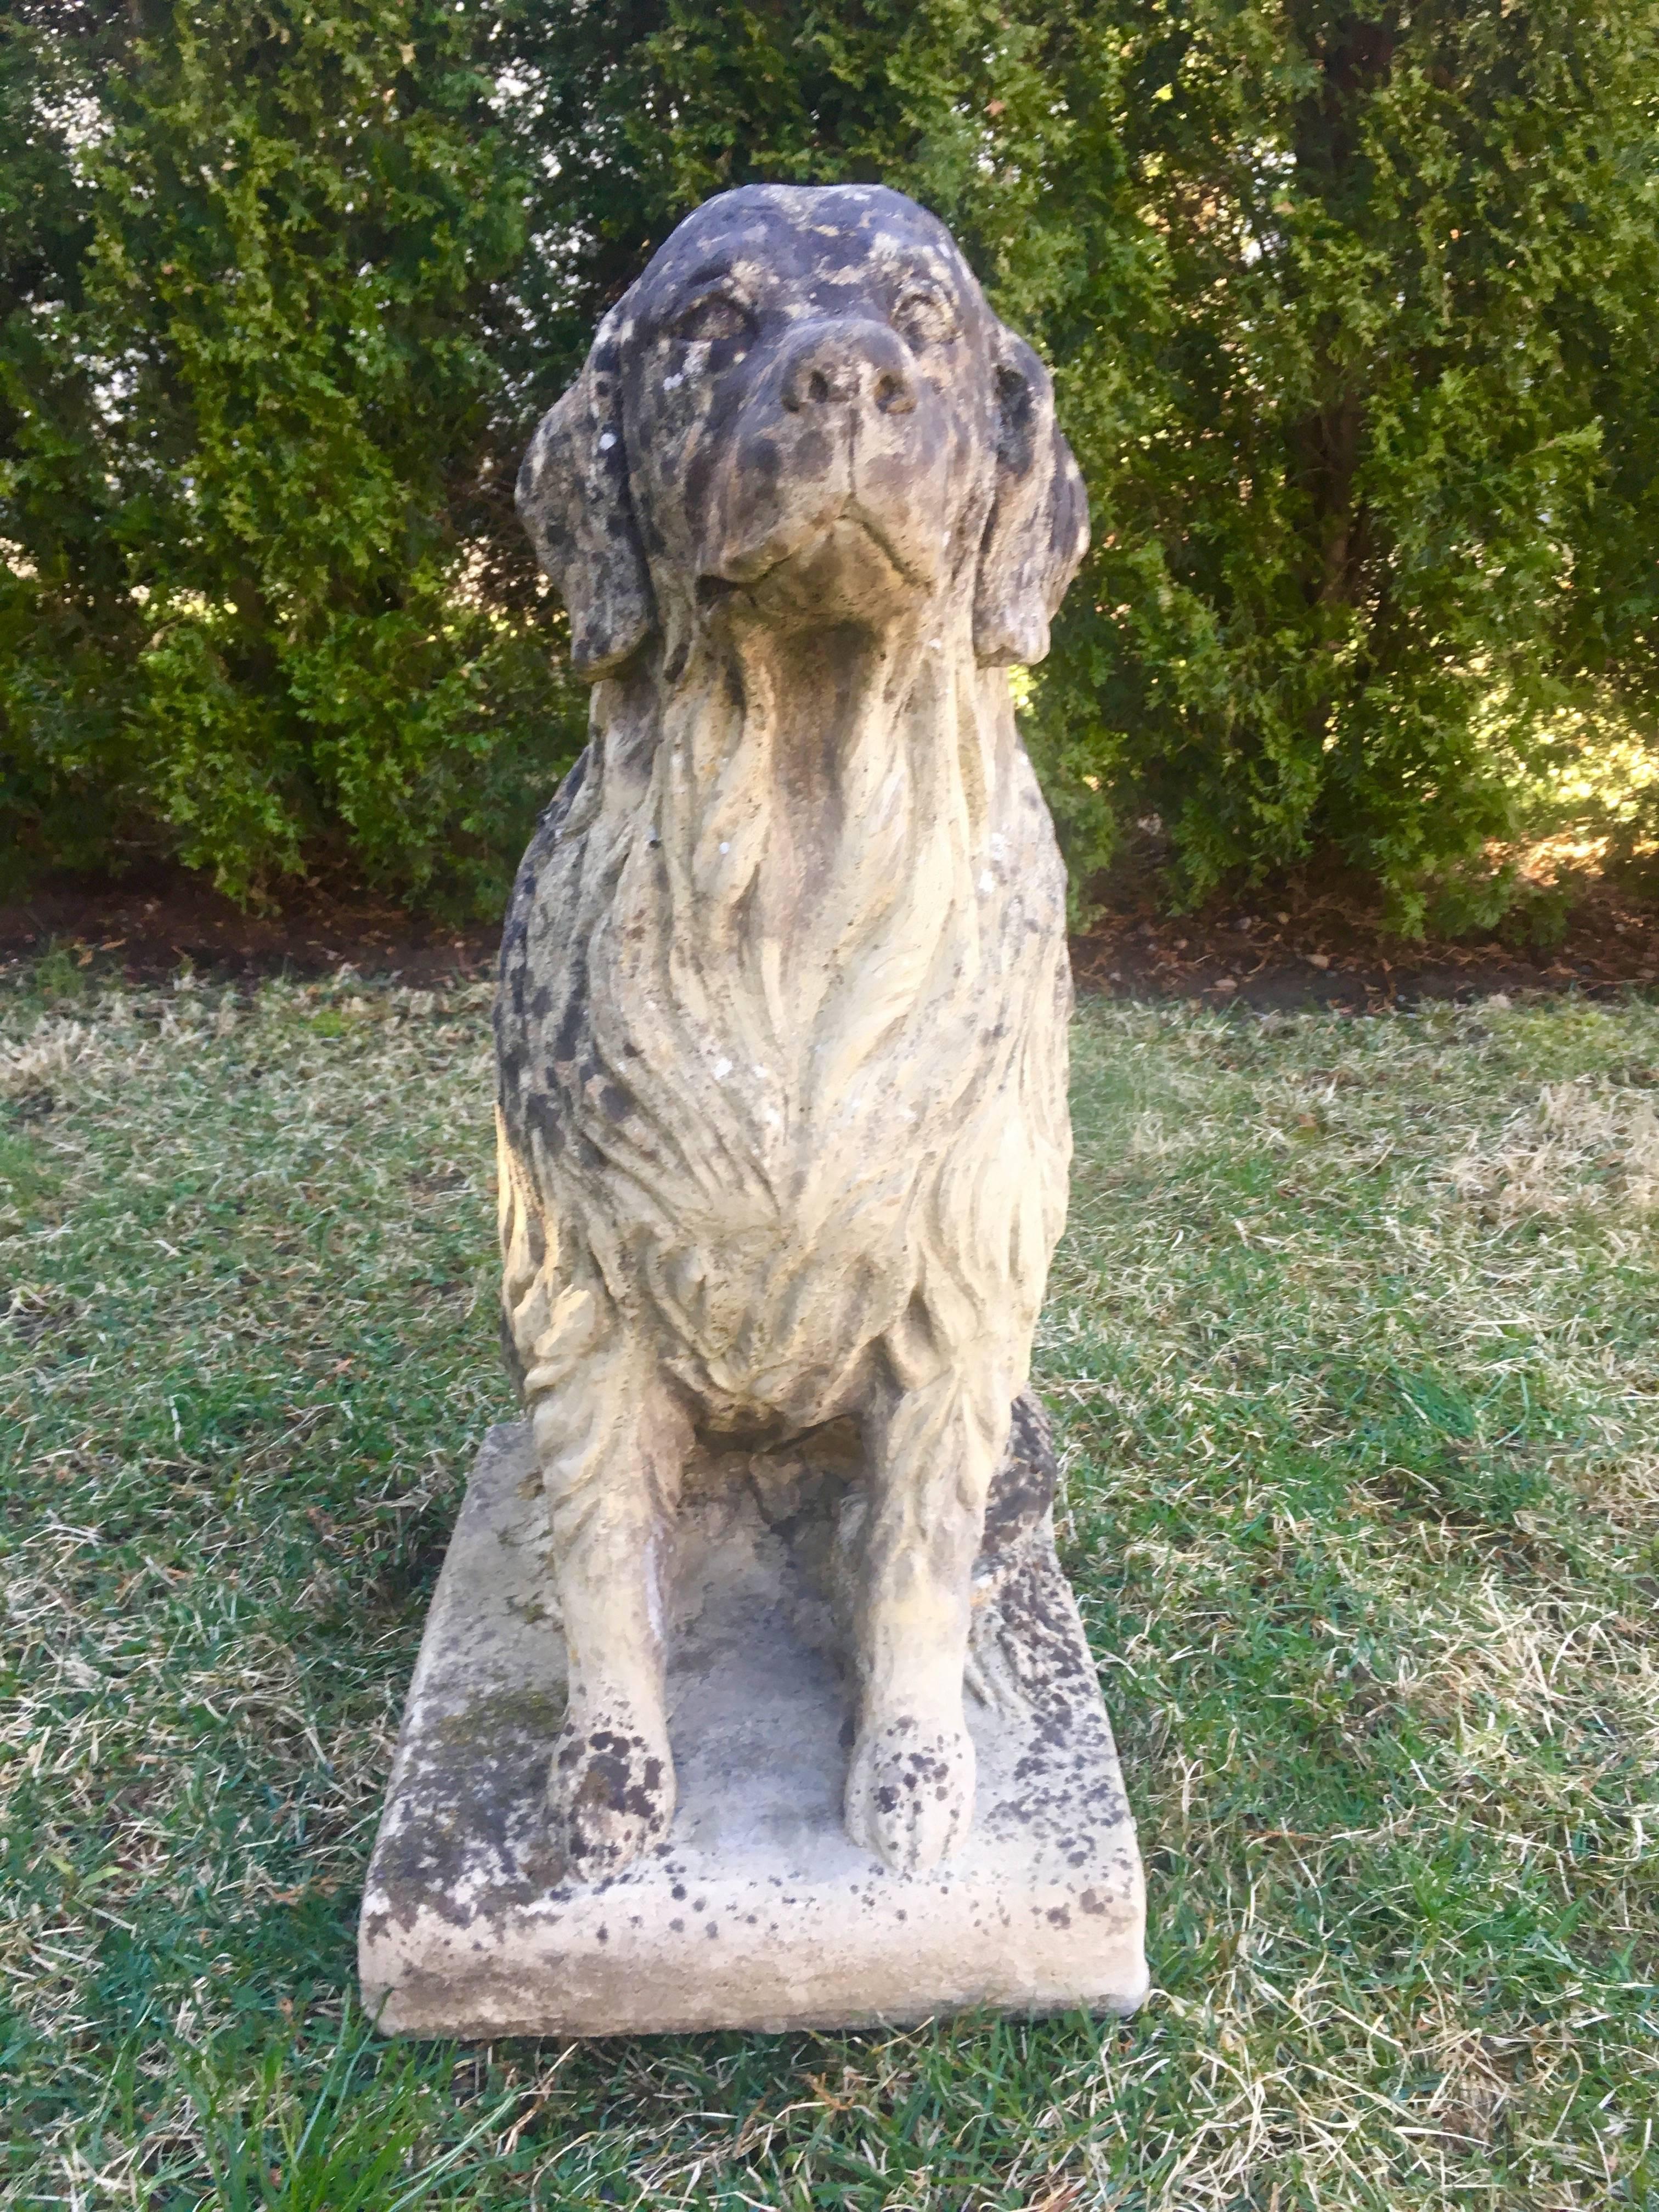 We found this exquisitely-detailed life-sized golden retriever statue in England and it is a beauty! Gender-neutral (see last photo), it has exceptional cast detail and a lovely naturally-patinated surface with age-appropriate weathering, lichen and